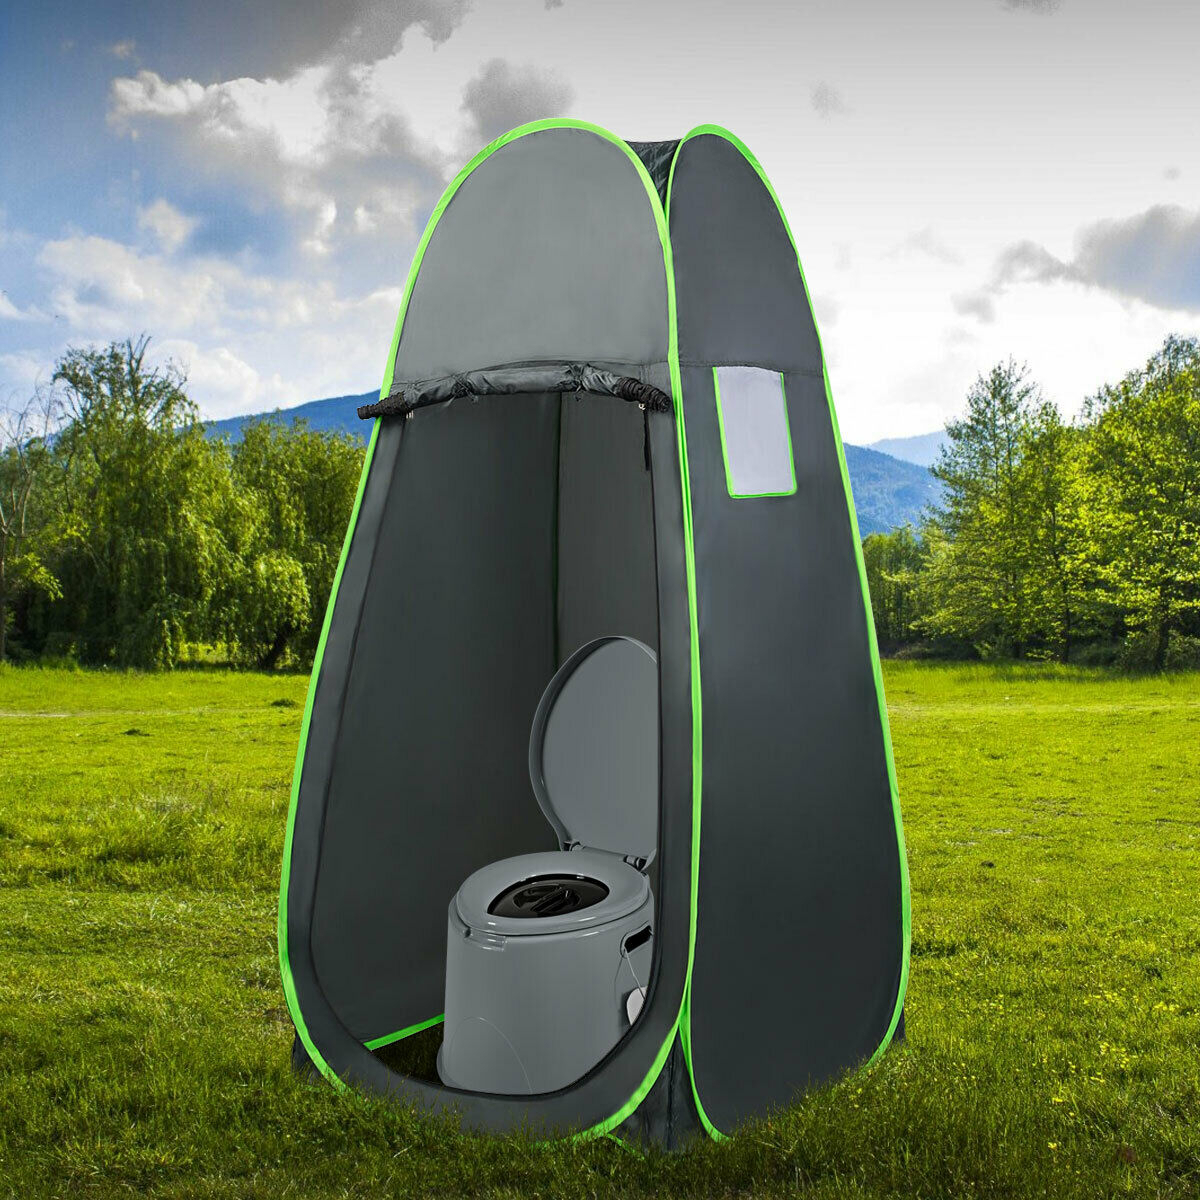 Portable Travel Toilet Indoor Outdoor W/Paper Holder Camping Hiking Boating